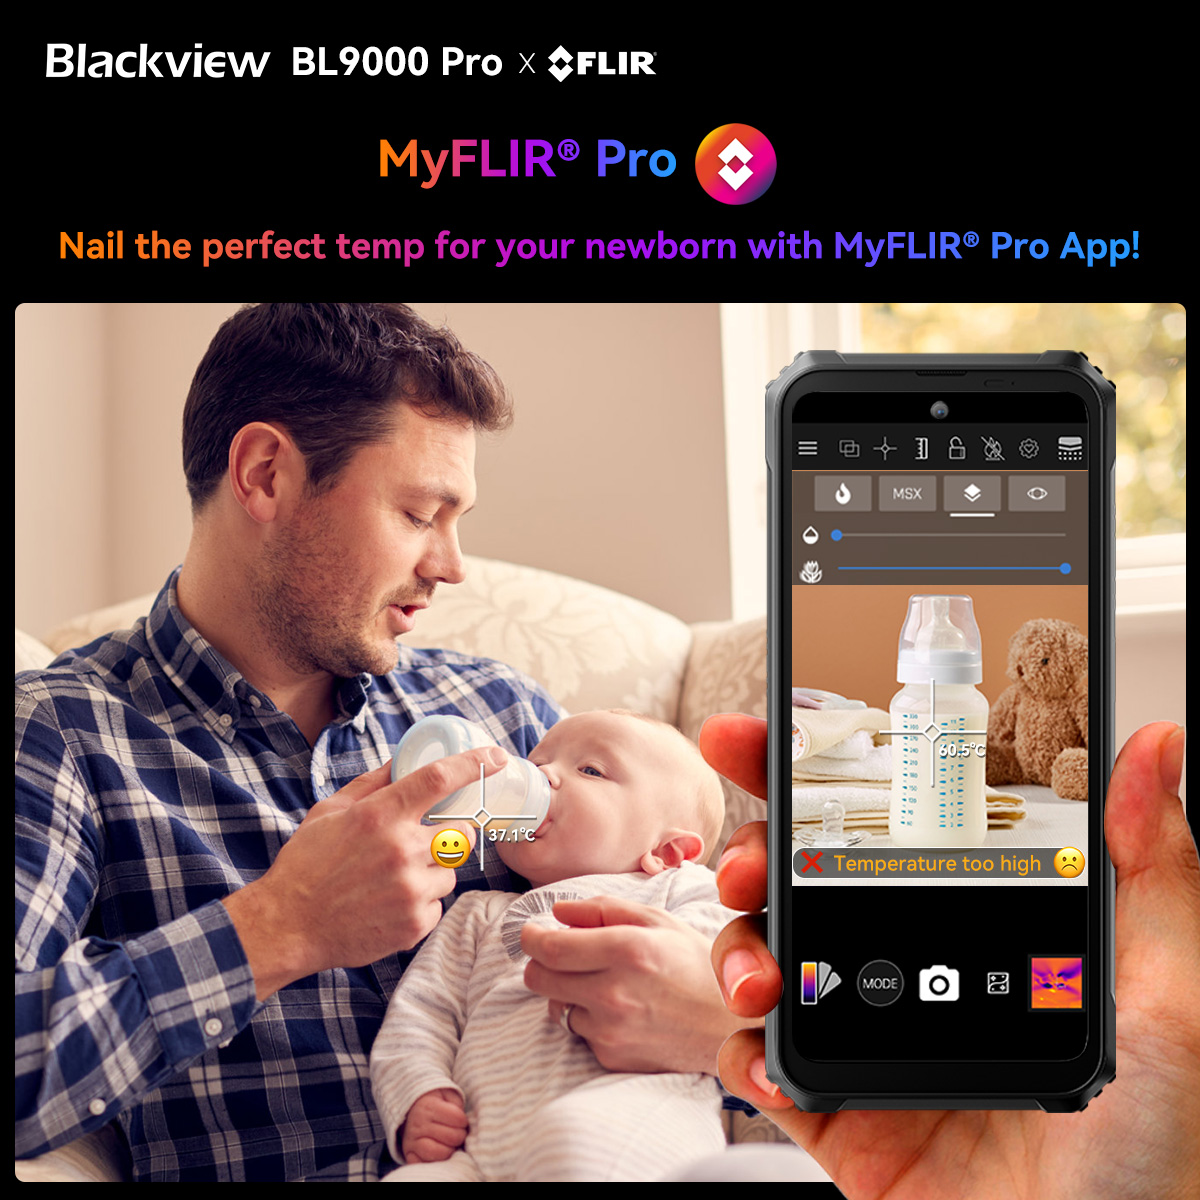 How does a clueless first-time dad become a bottle-feeding pro with a #Blackview #BL9000Pro in hand? Perfect bottle temperature every time with upgraded #FLIR thermal tech in the BL9000 Pro!
Explore more: s.click.aliexpress.com/e/_oEi5QH6